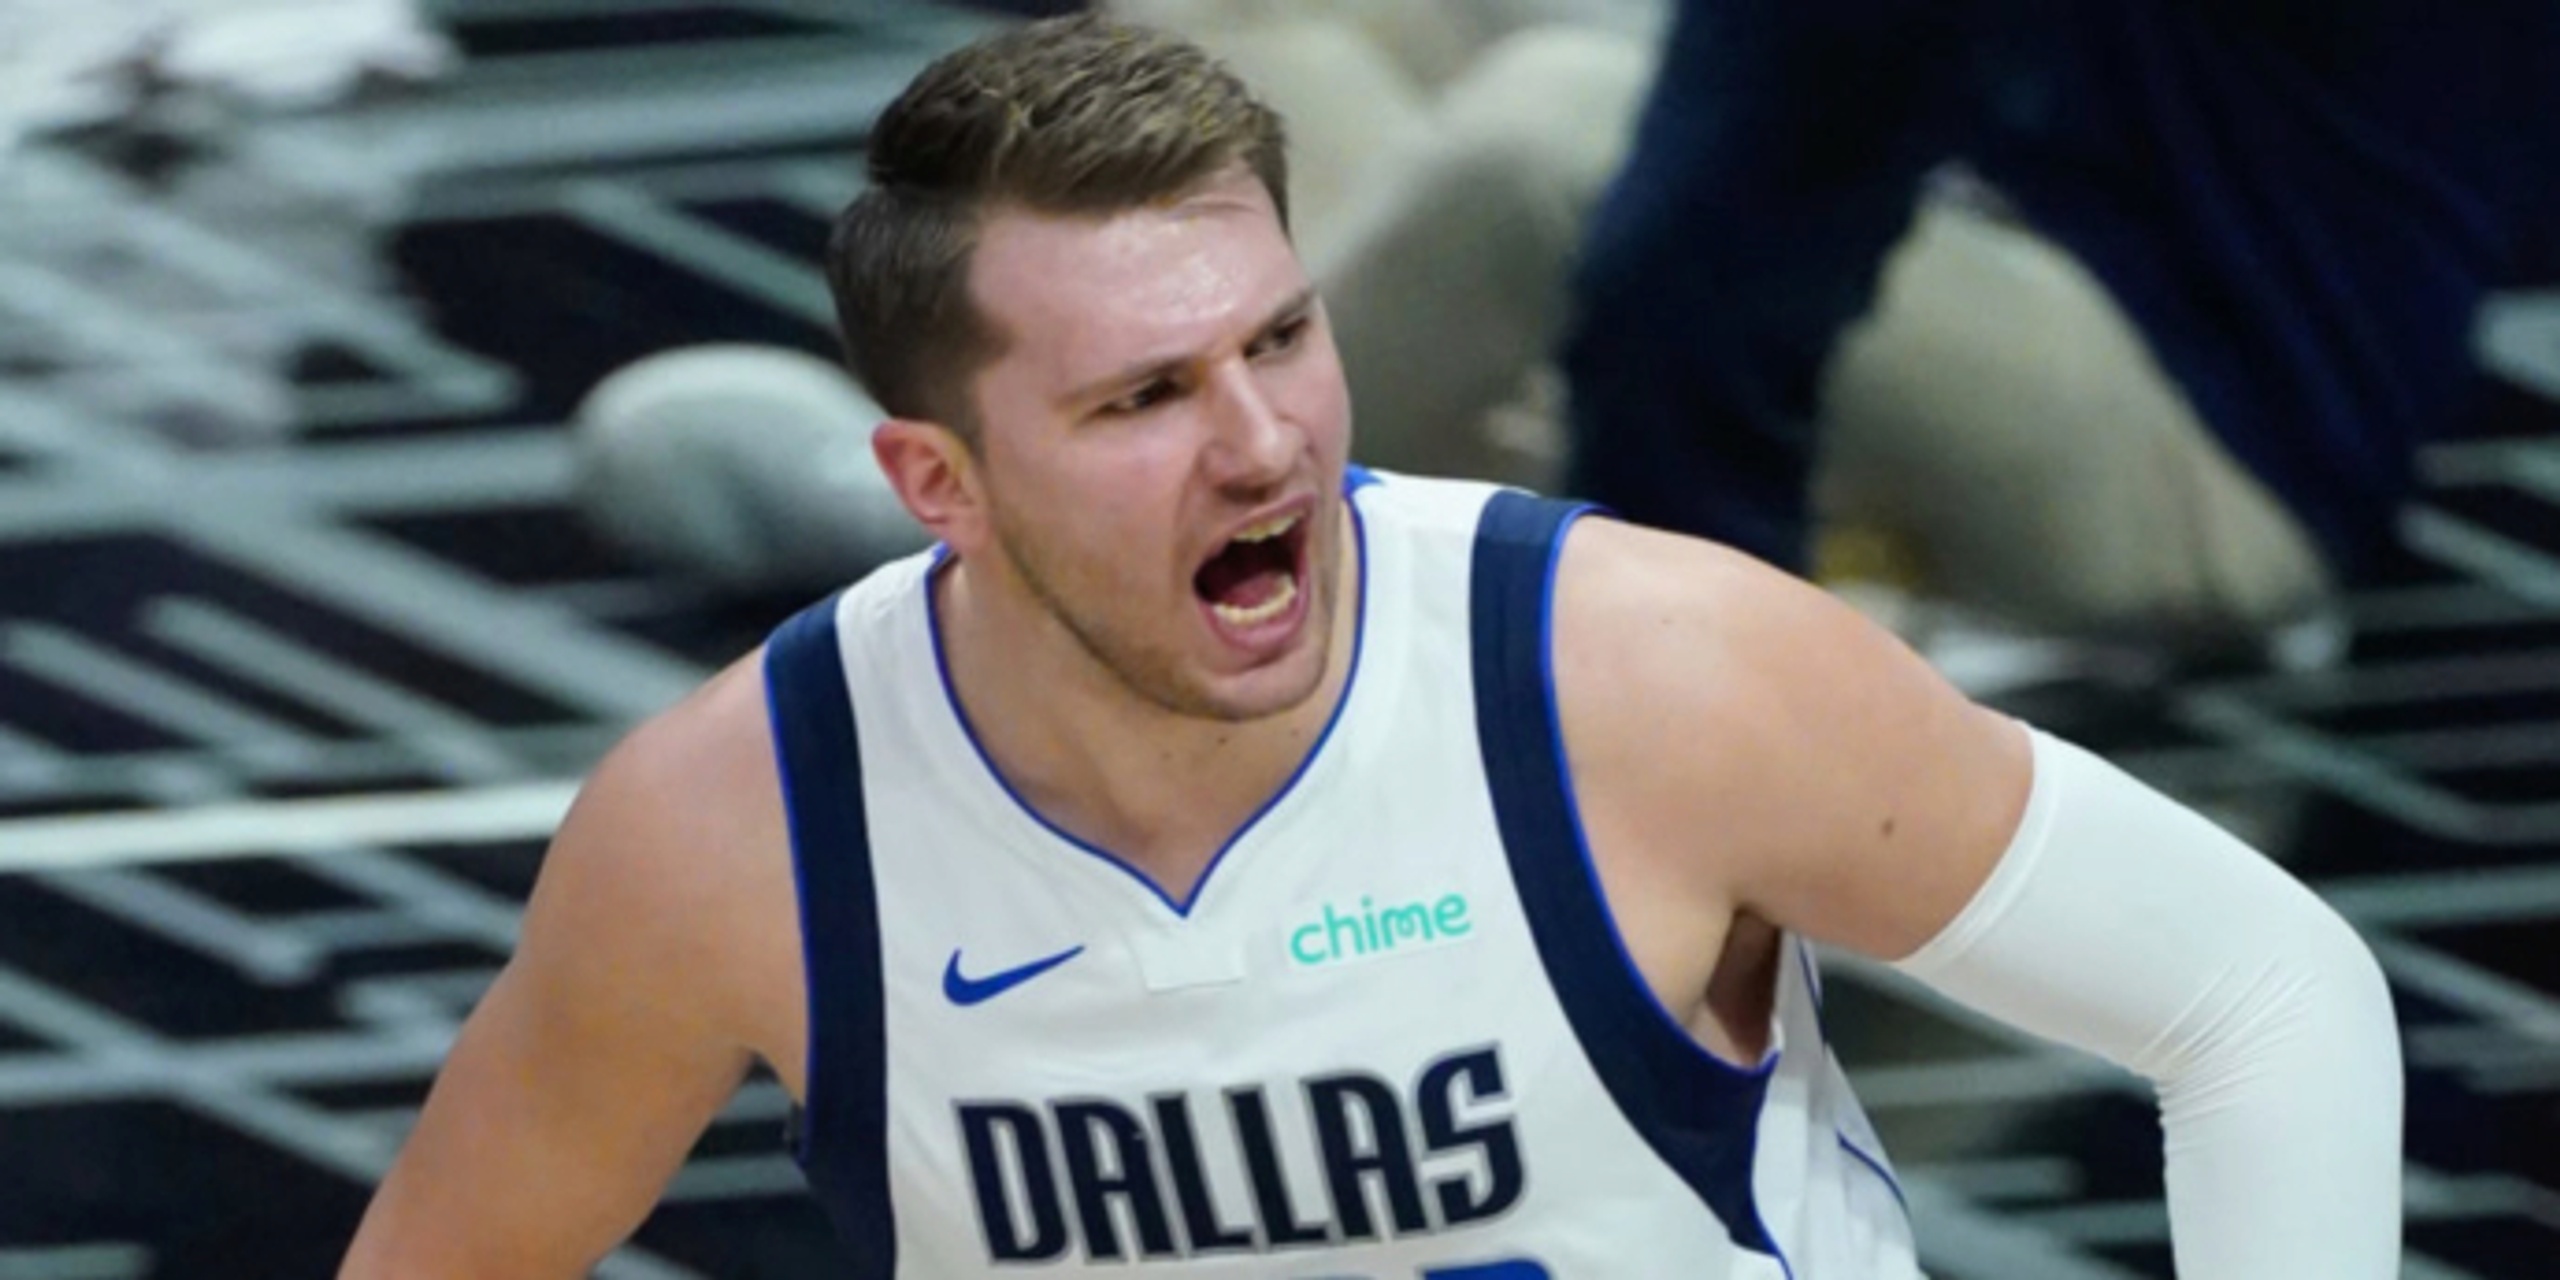 Through 2 games, nothing the Clippers have thrown at Luka Doncic has mattered